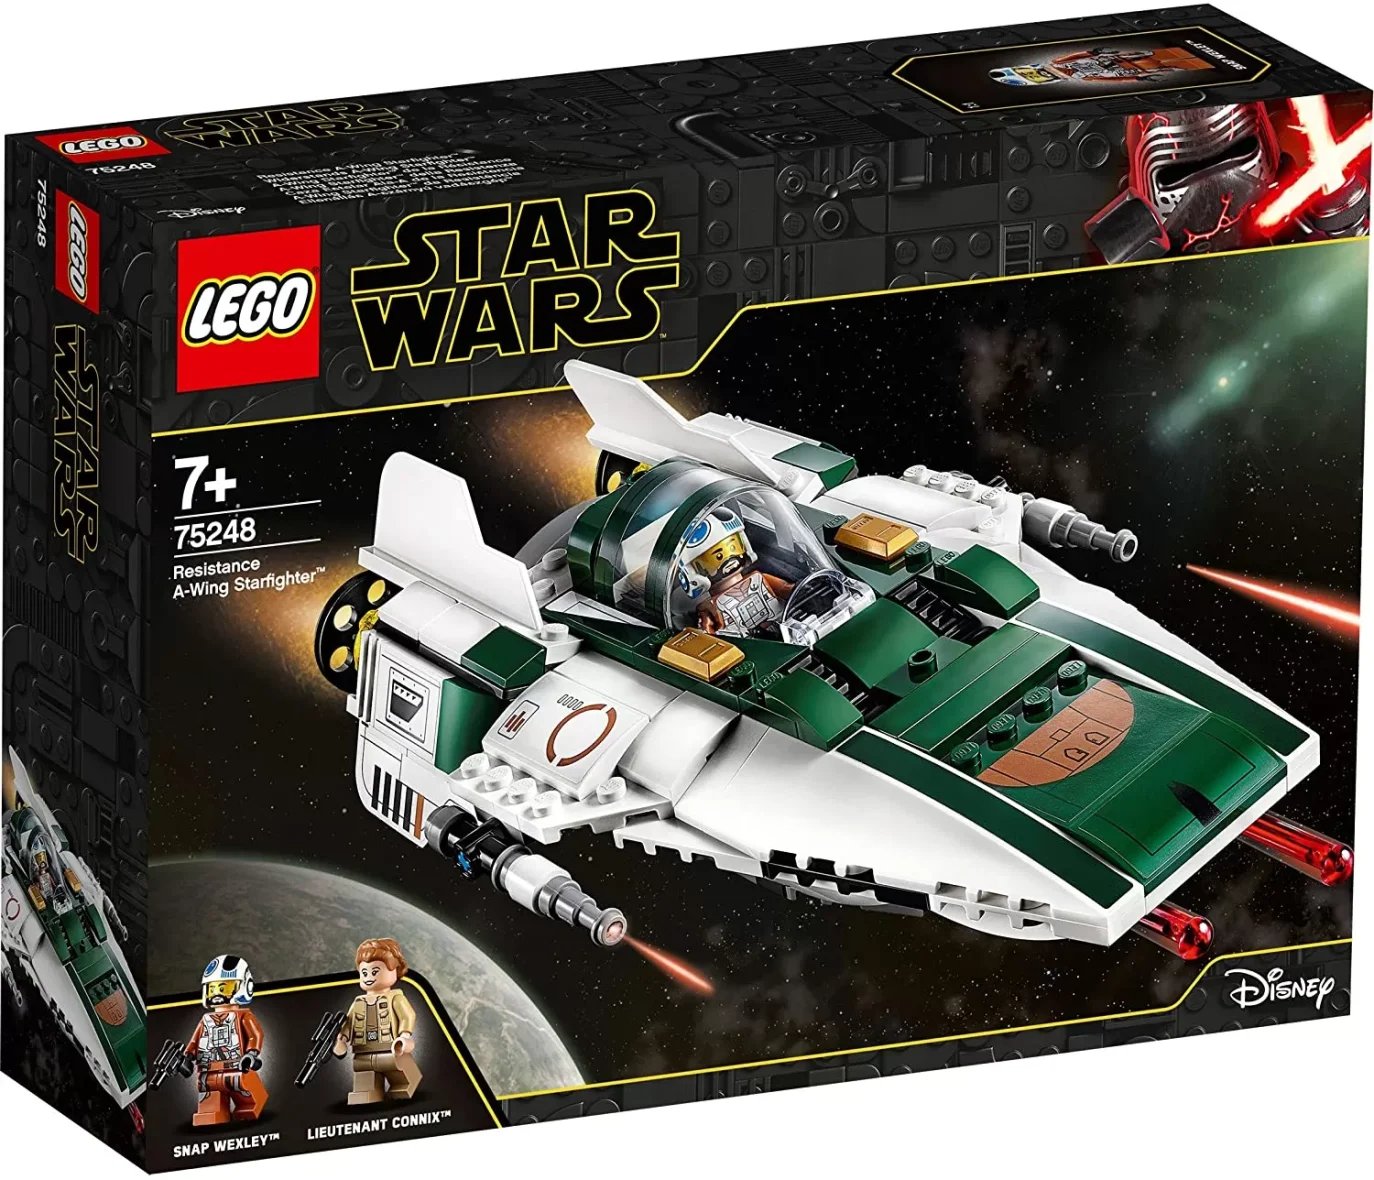 LEGO STAR WARS RESISTANCE A-WING STARFIGHTER 75248